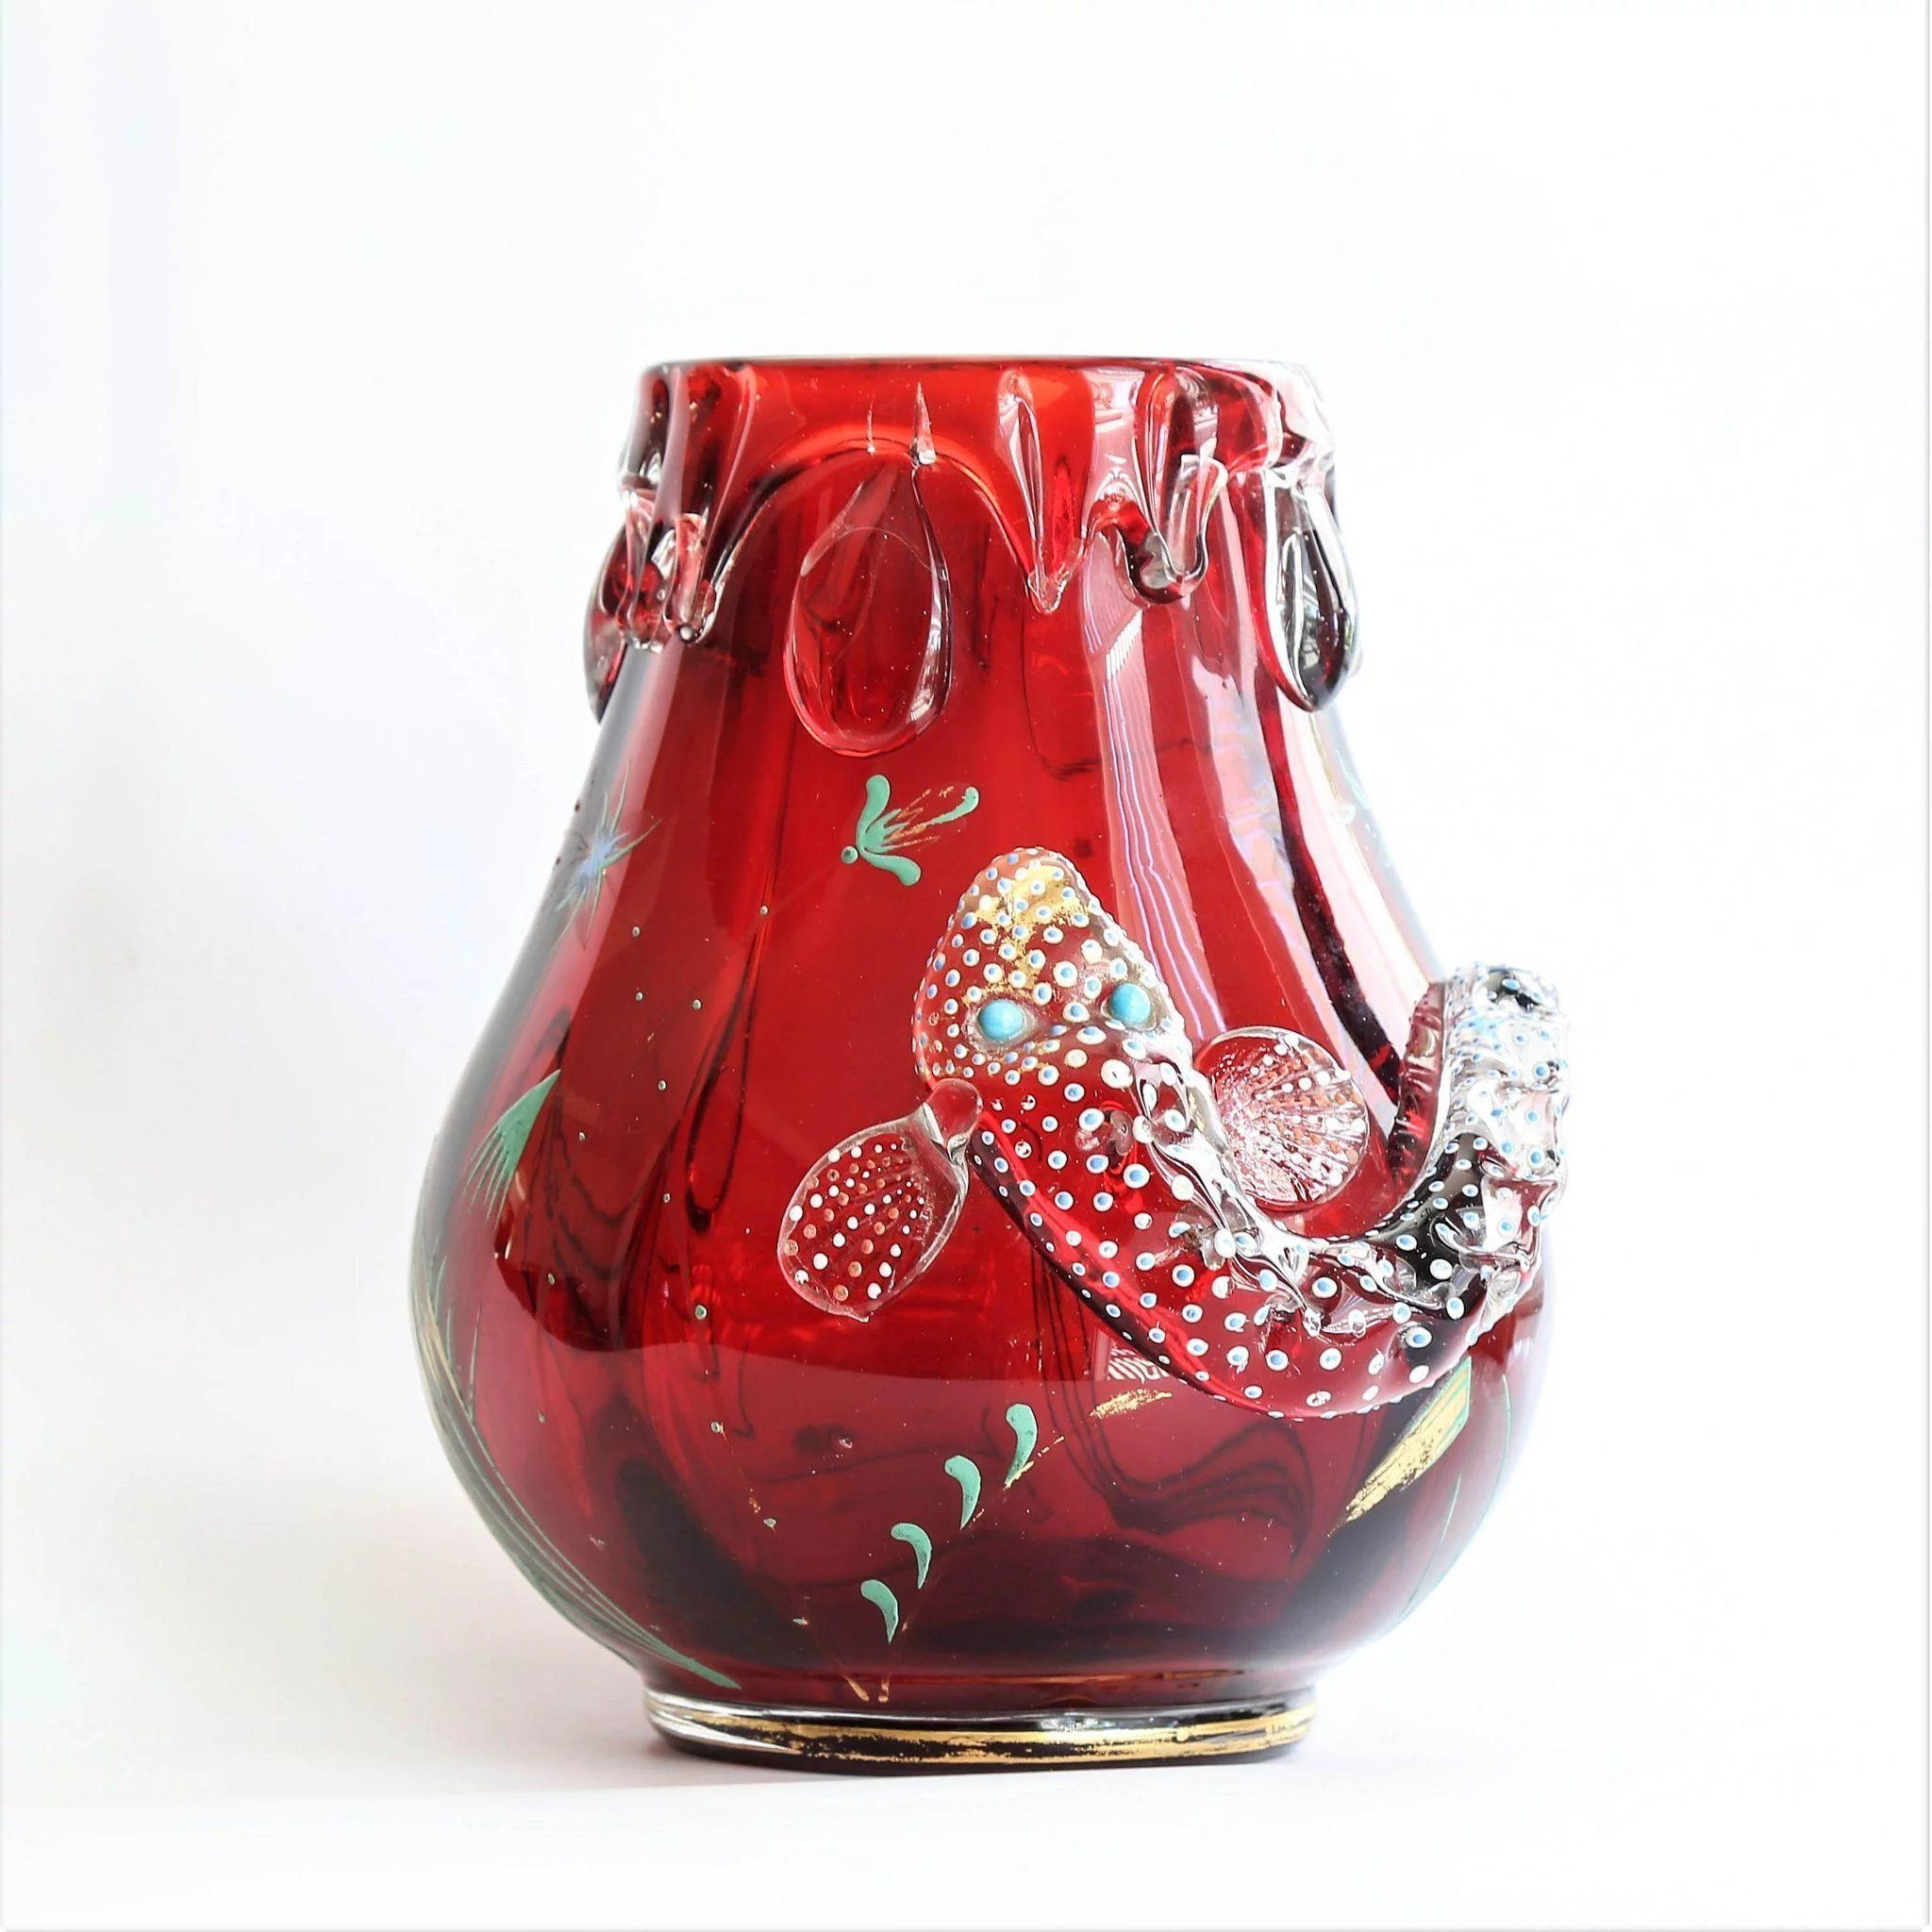 24 Cute Ruby Red Vase 2024 free download ruby red vase of rare circa 1900 moser ruby red vase with enameled fish in 2018 with regard to title rare circa 1900 moser ruby red vase with enameled fish price 995